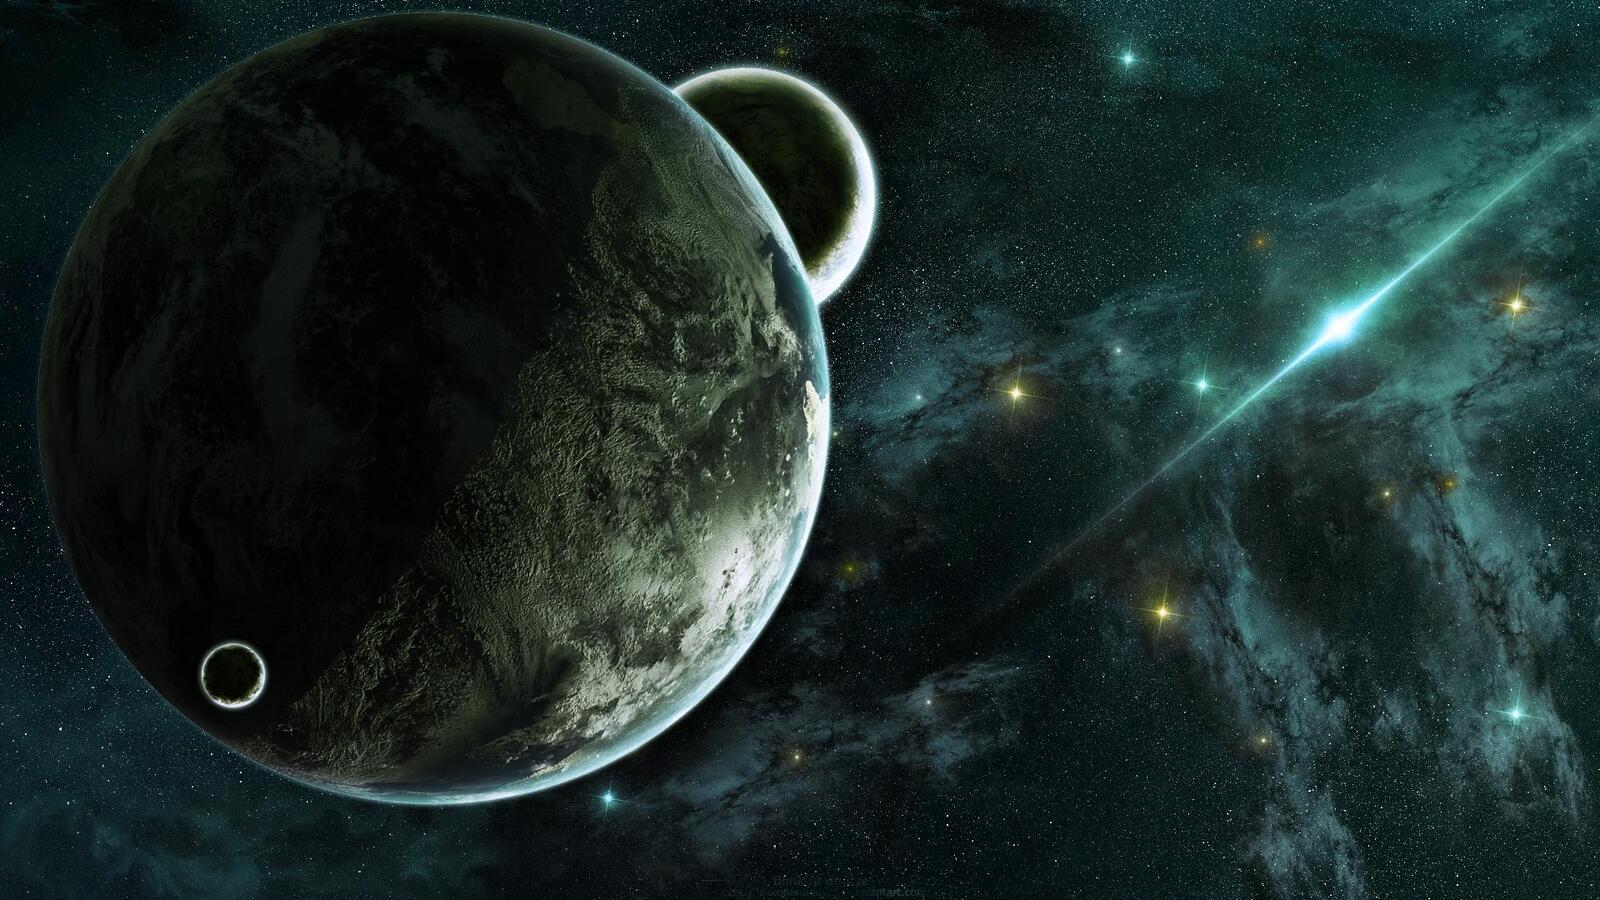 Wallpapers space the universe two planets on the desktop